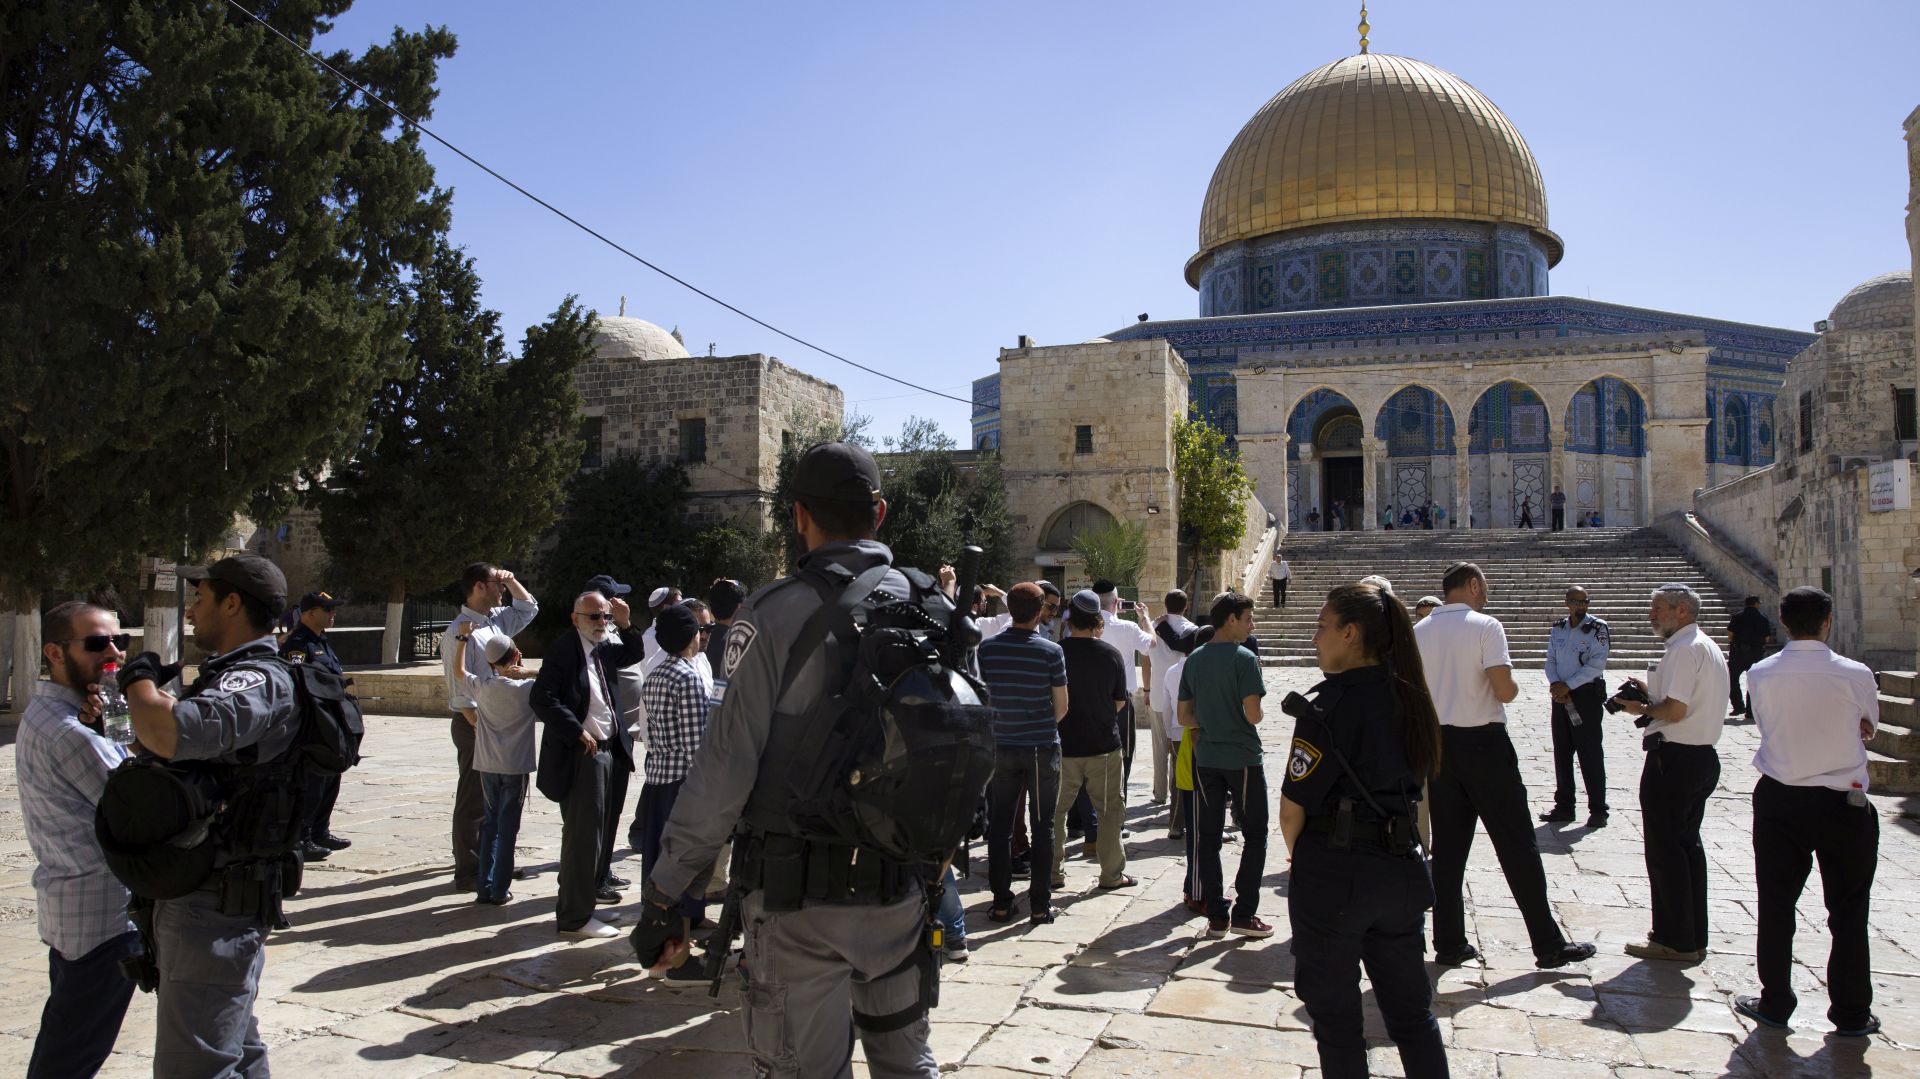 epa06117231 Israeli riot police personnel escort a group of religious Israeli Jews near the distinctive golden Dome of the Rock as they tour the Temple Mount, or Haram el-Sharif (The Noble Sanctuary) as it is known to Arabs, in Jerusalem's Old City, 30 July 2017. The area was closed to tourism during some two weeks of tension and clashes following the attack on Israeli security guards on 14 July 2017, and has now resumed after Israeli removed the controversial metal detectors and cameras or the al-Aqsa Mosque compound.  EPA/JIM HOLLANDER